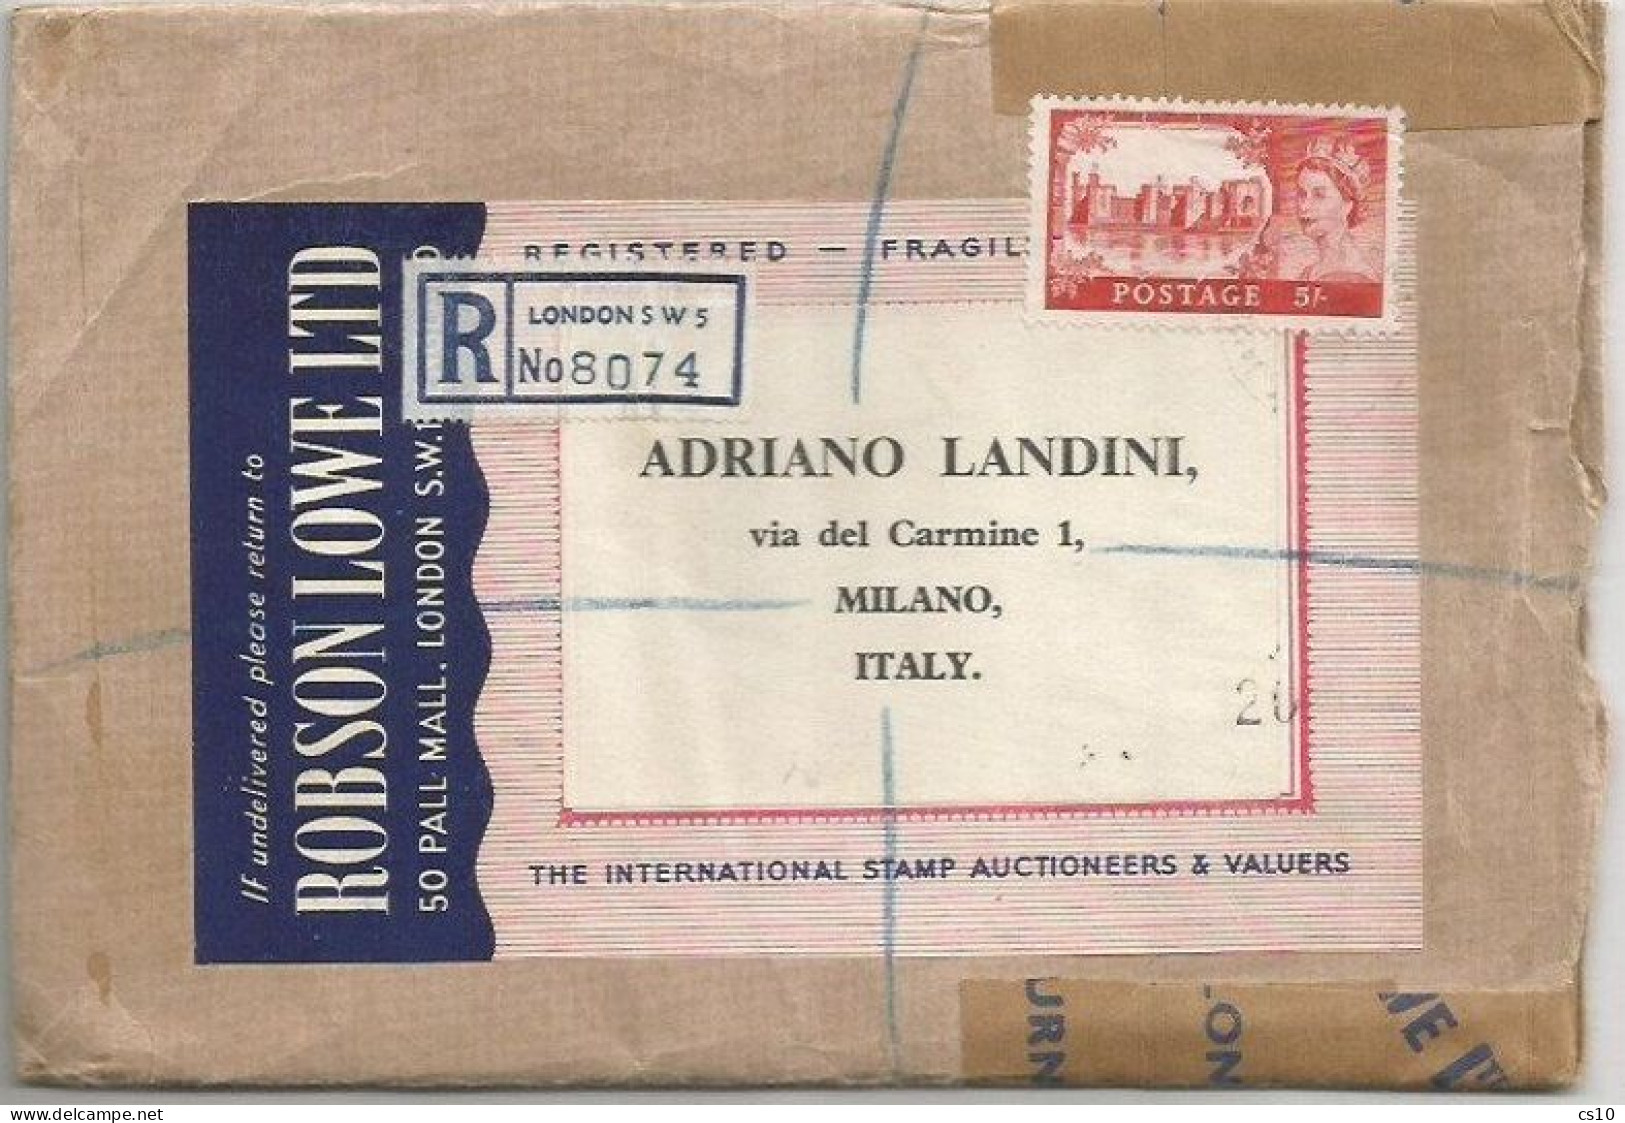 UK Britain Castles QE2 S5 Solo Franking Reg.CV London 3march 1967 To Italy - Marcophilie